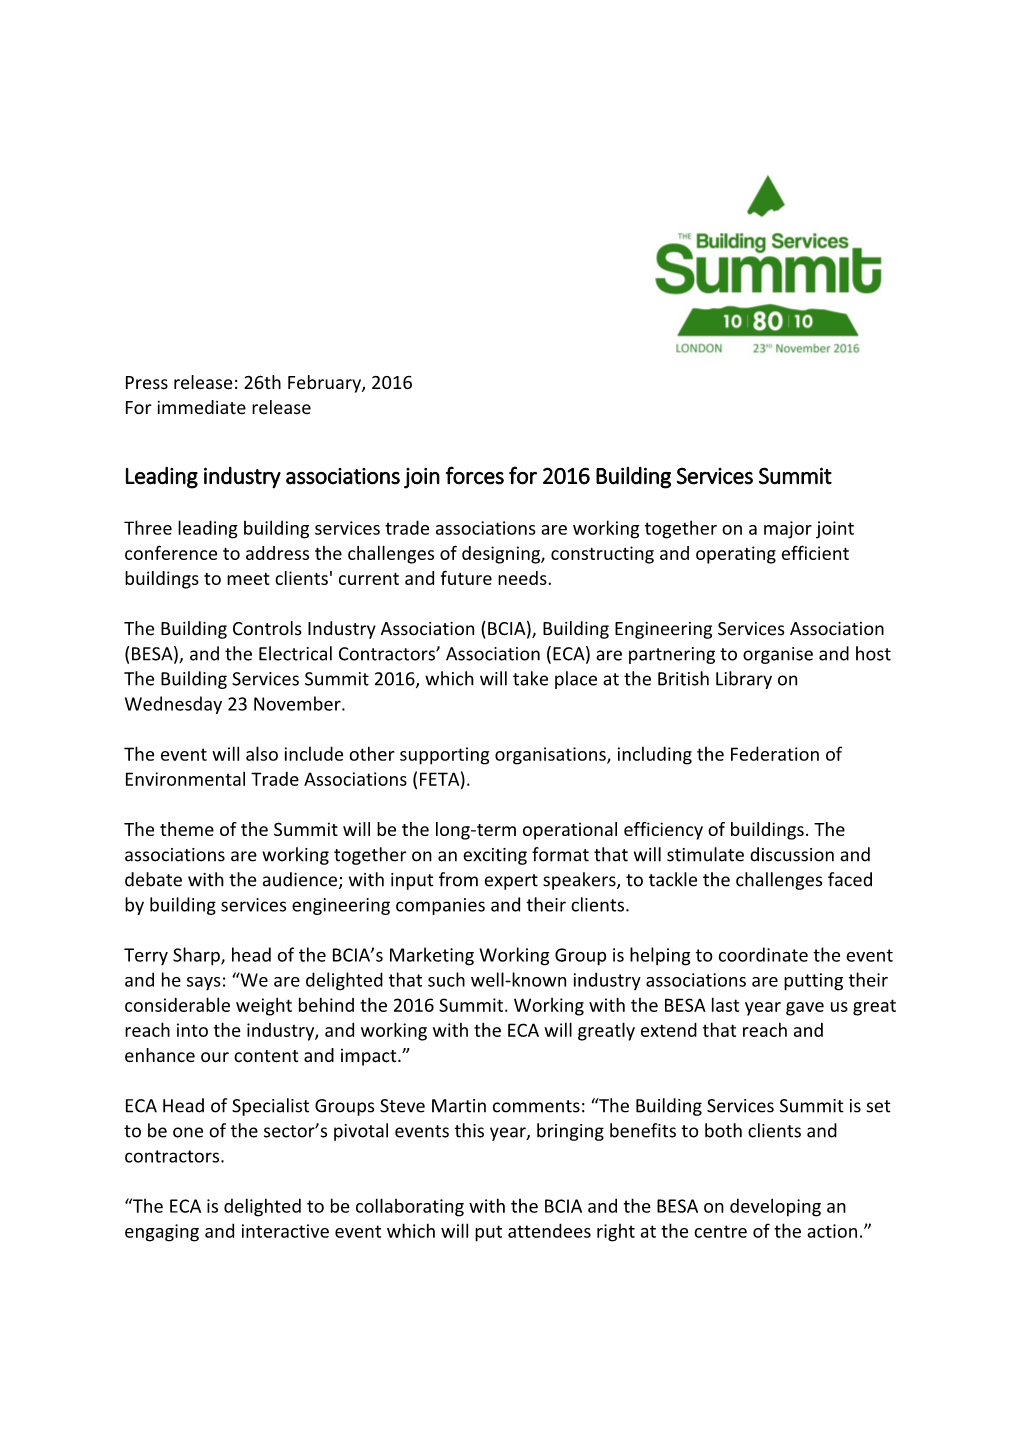 Leading Industry Associations Join Forces for 2016 Building Services Summit